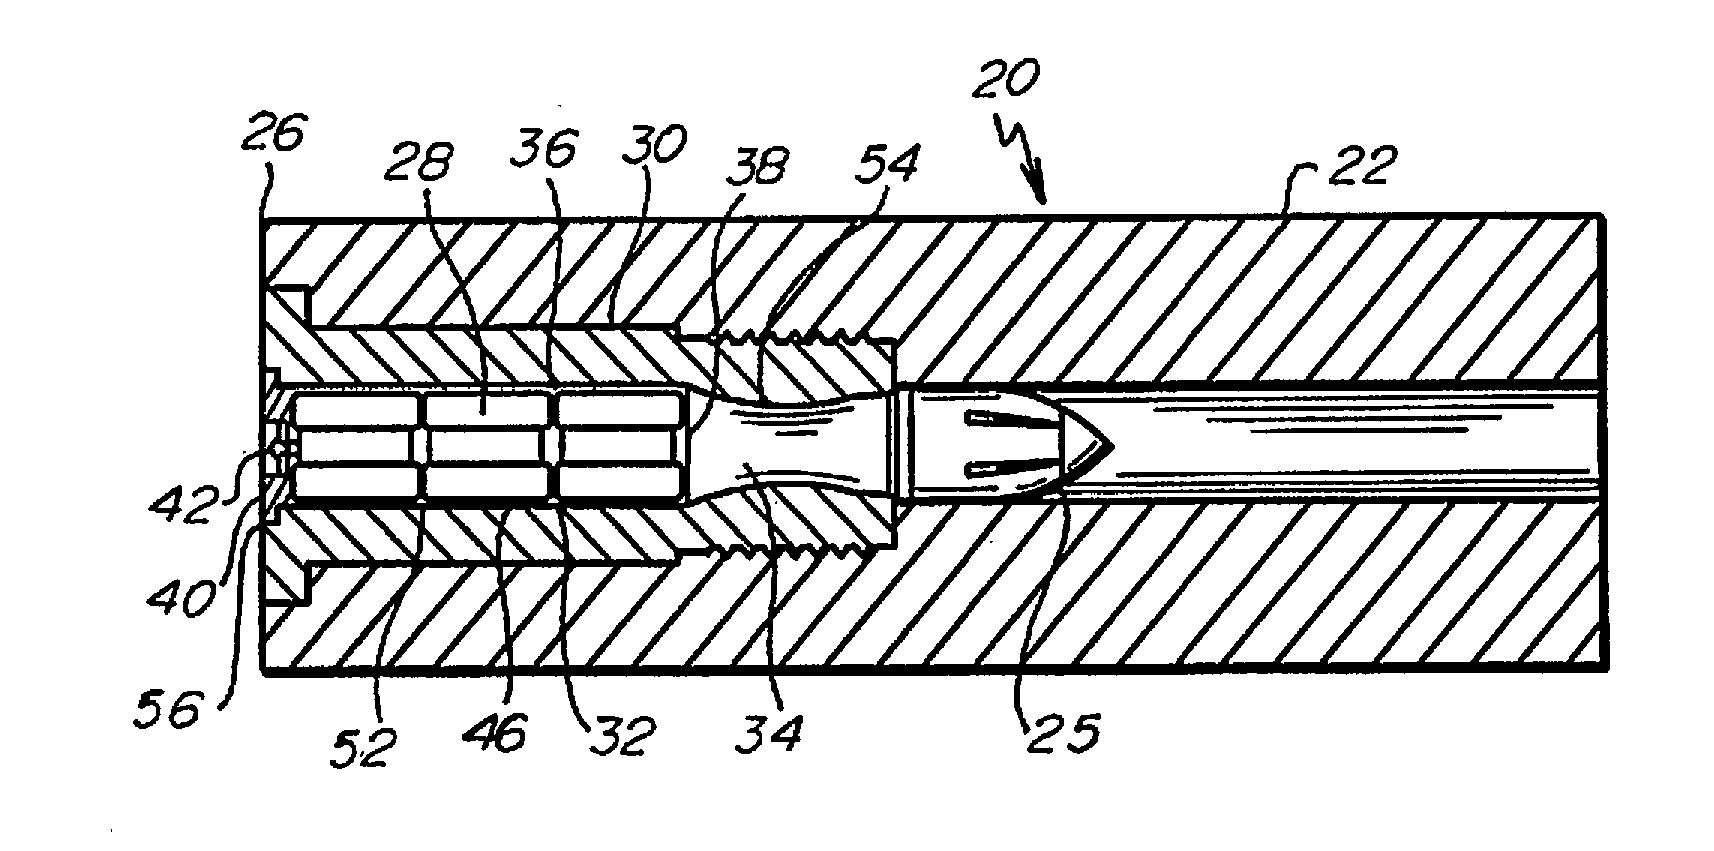 Muzzleloader and propellant system